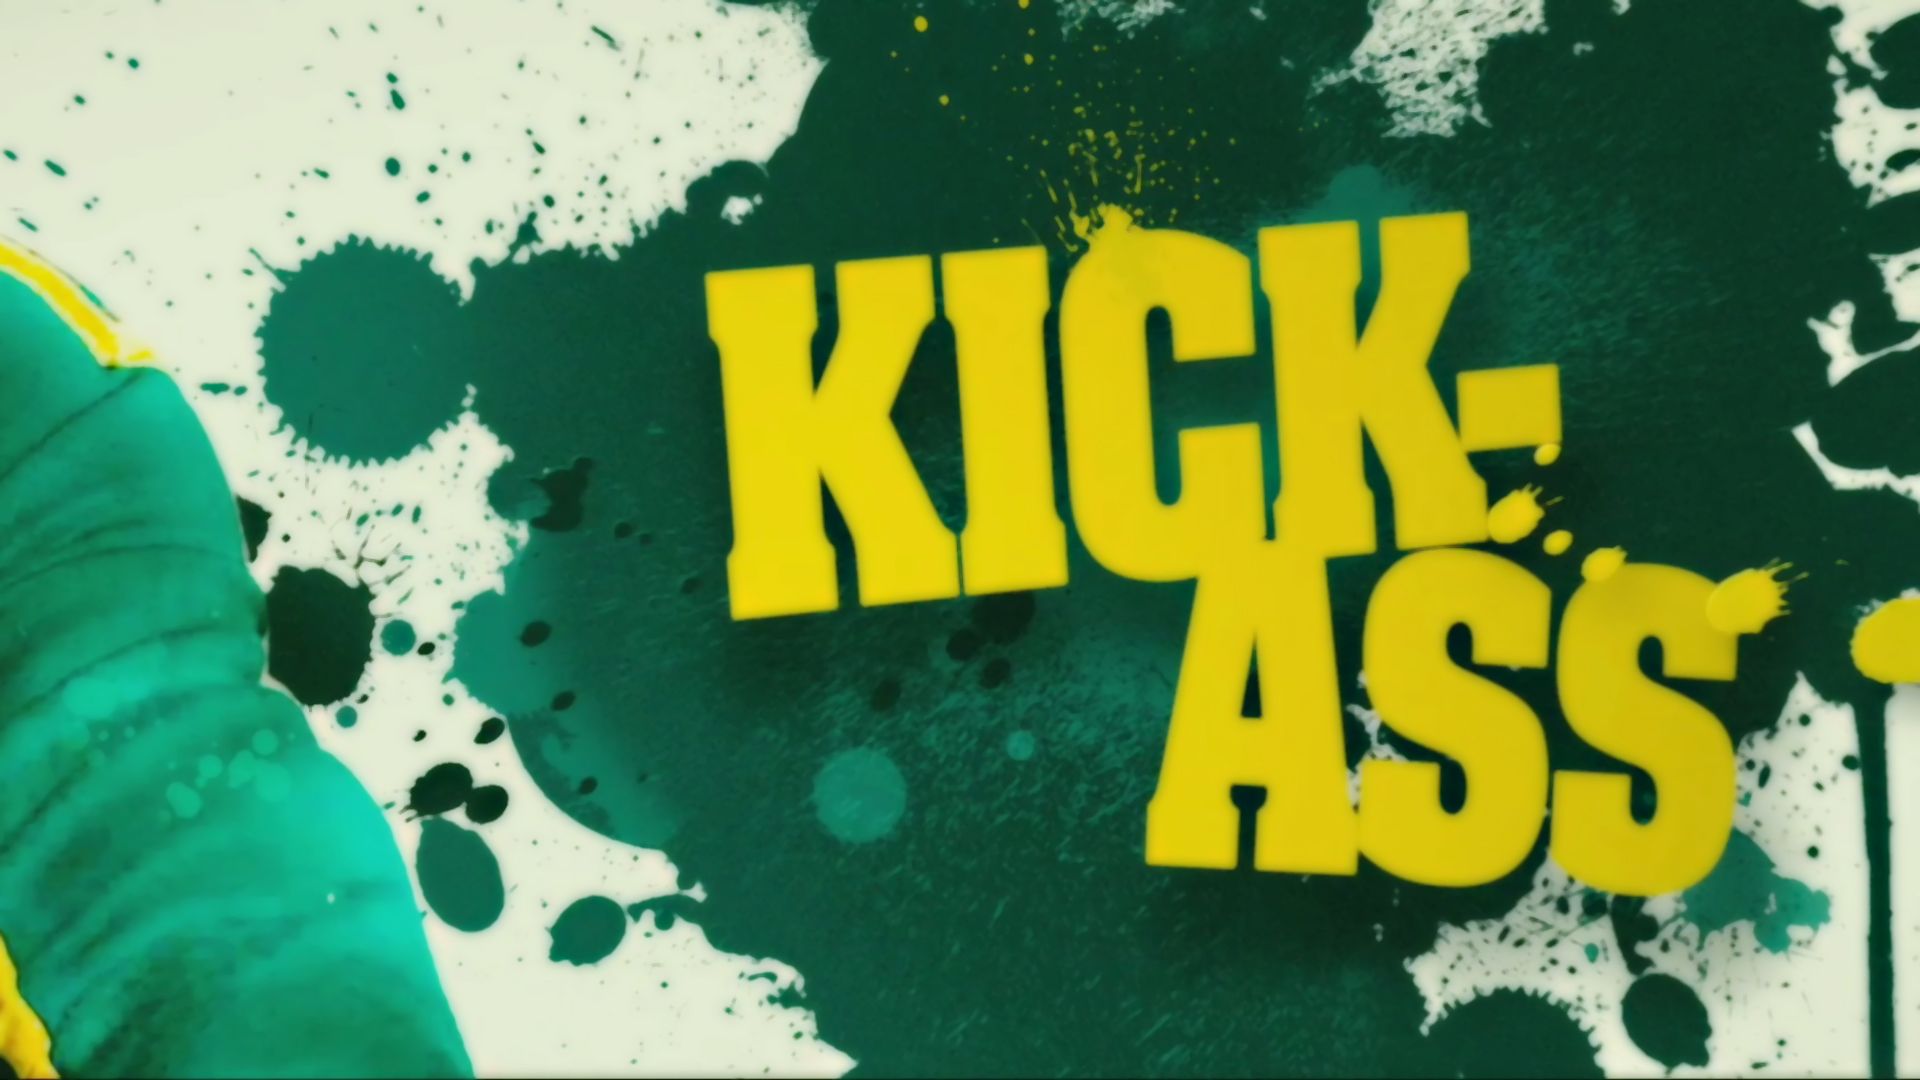 Kick Ass Free Desktop Wallpapers for HD, Widescreen and Mobile